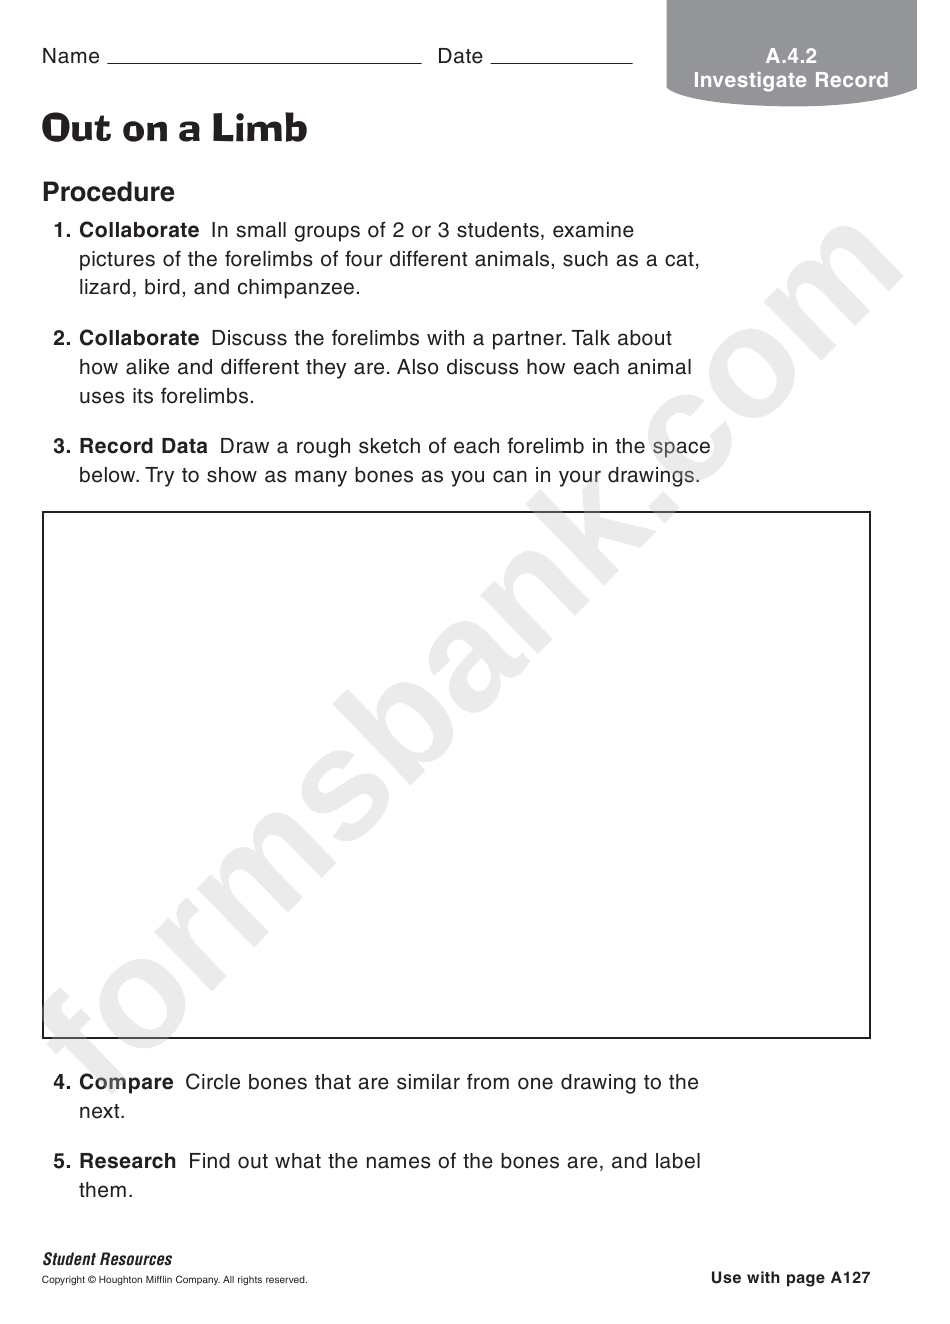 Out On A Limb Biology Worksheet